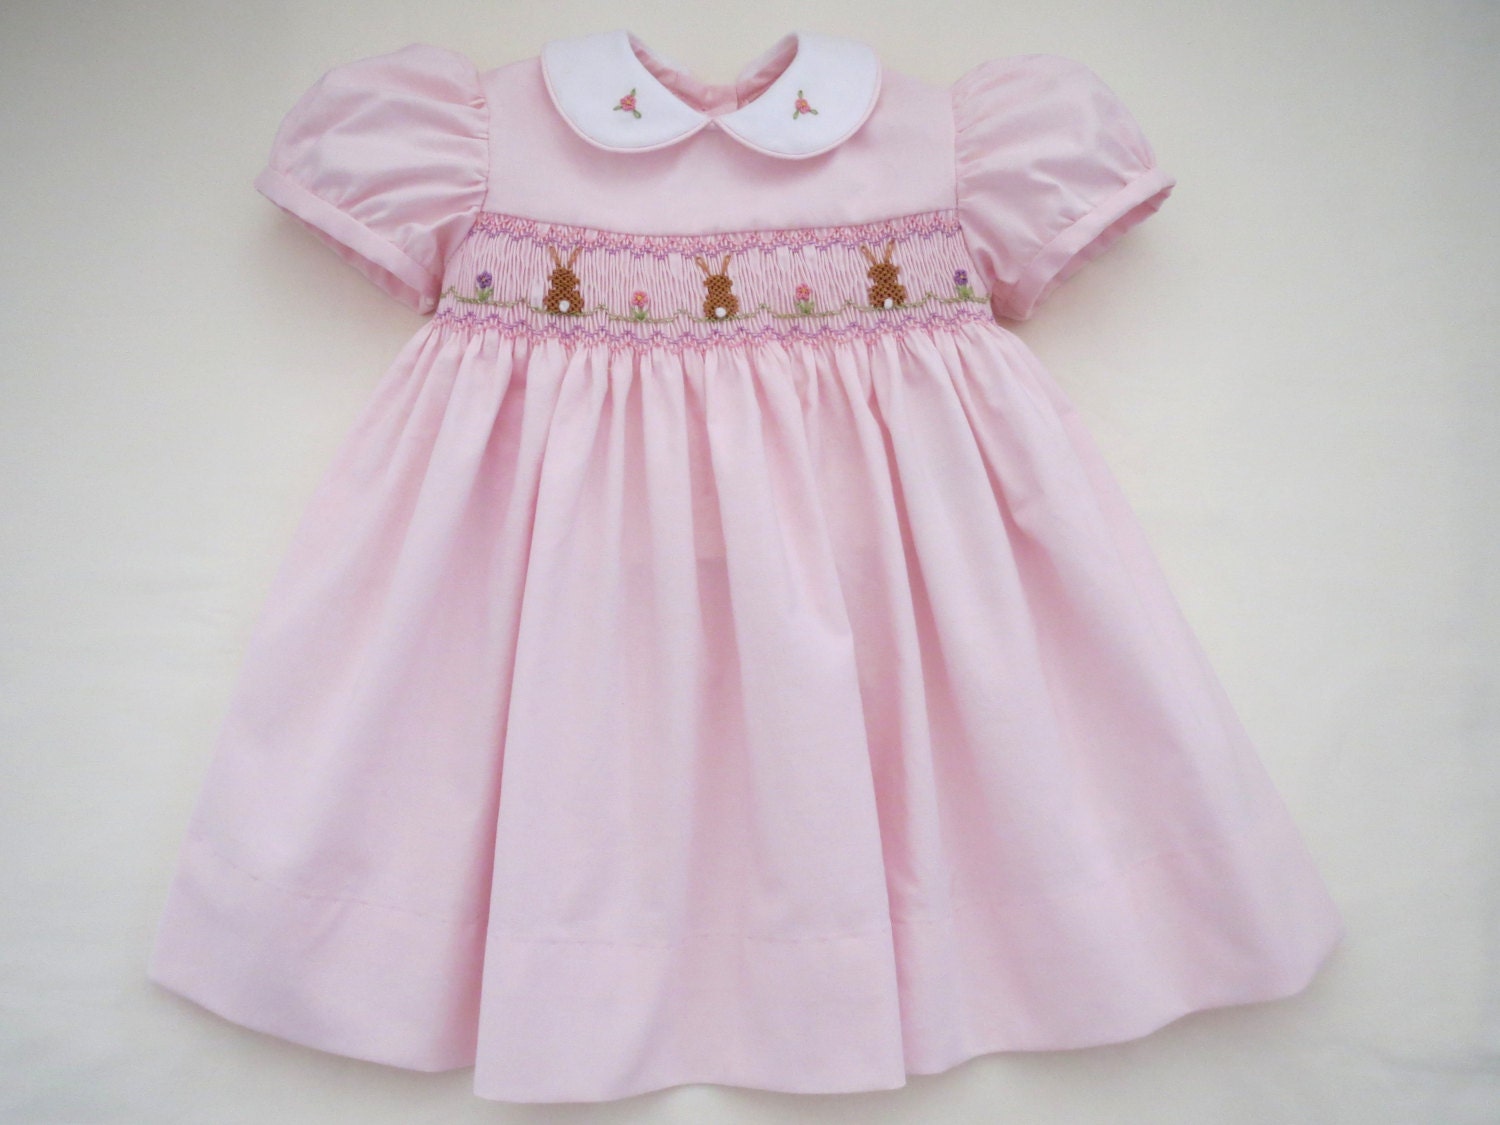 Adorable Hand Smocked Soft Pink Easter Bunny Dress for Baby - Etsy ...